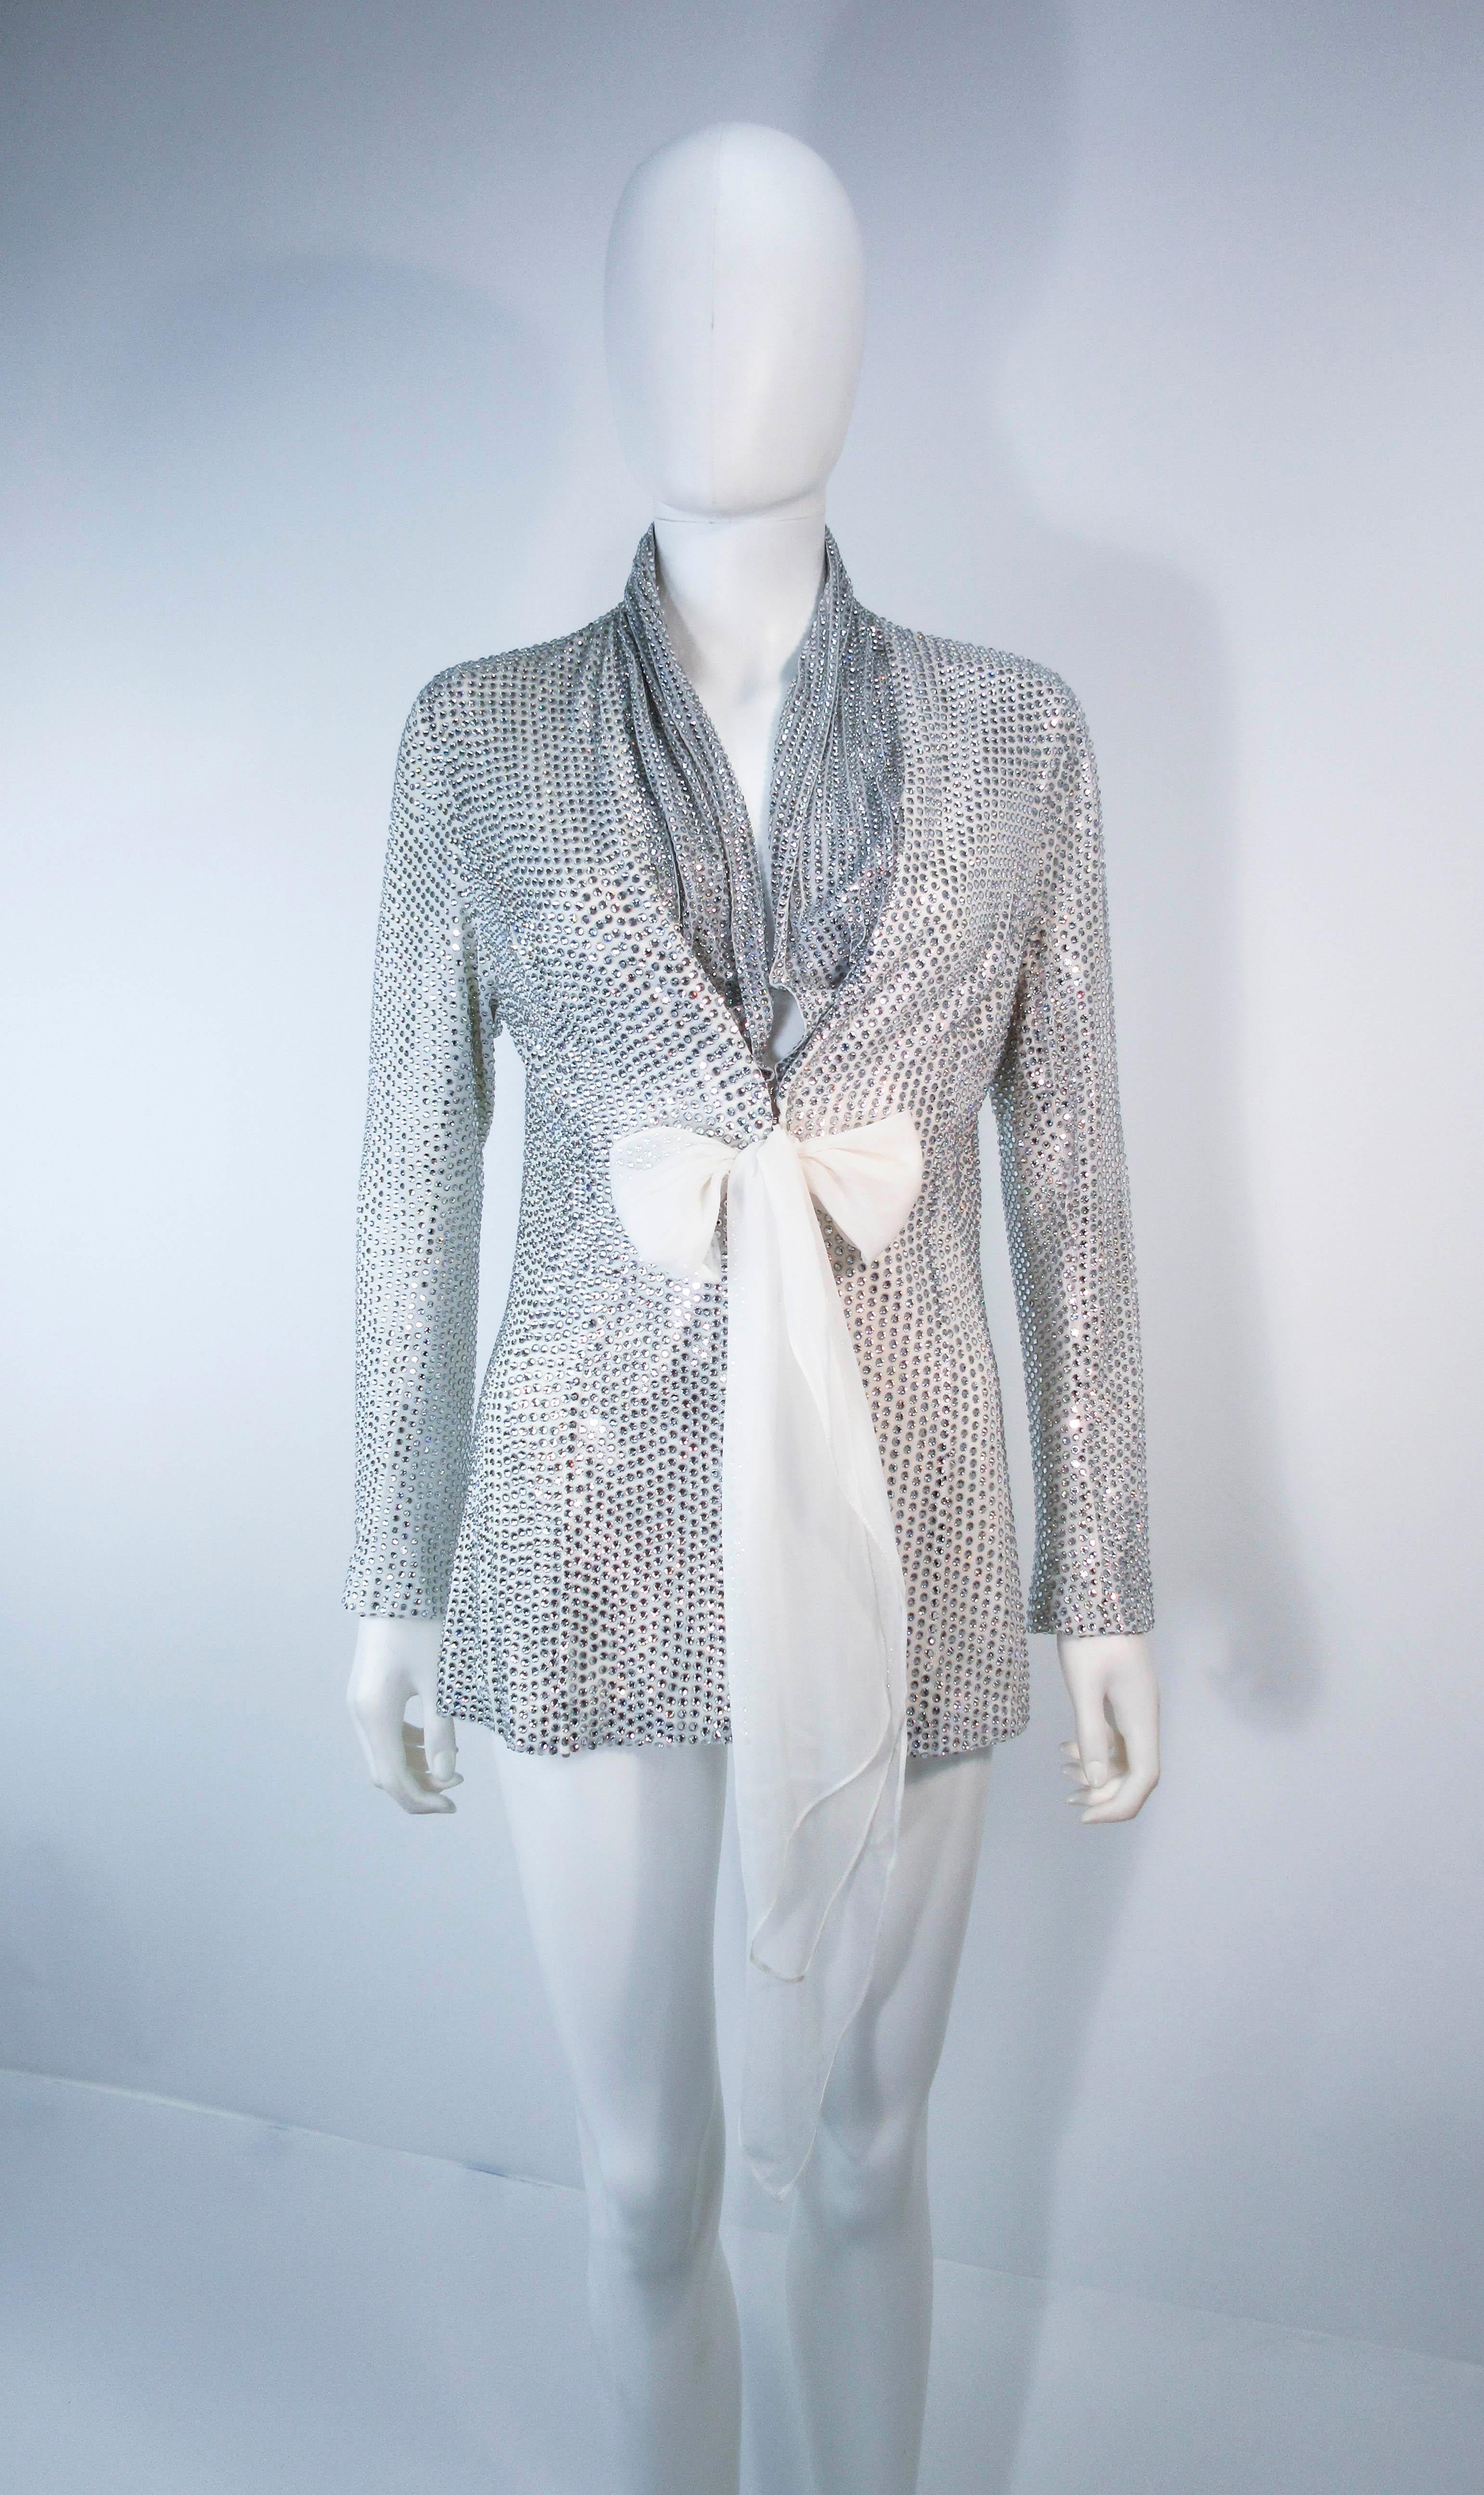 
LSO Designs, 100% silk lined, all-over heat pressed glass rhinestone. This is a custom made jacket that features a center front closure and white silk chiffon draped sash.

In excellent vintage condition.

**Please cross-reference measurements for